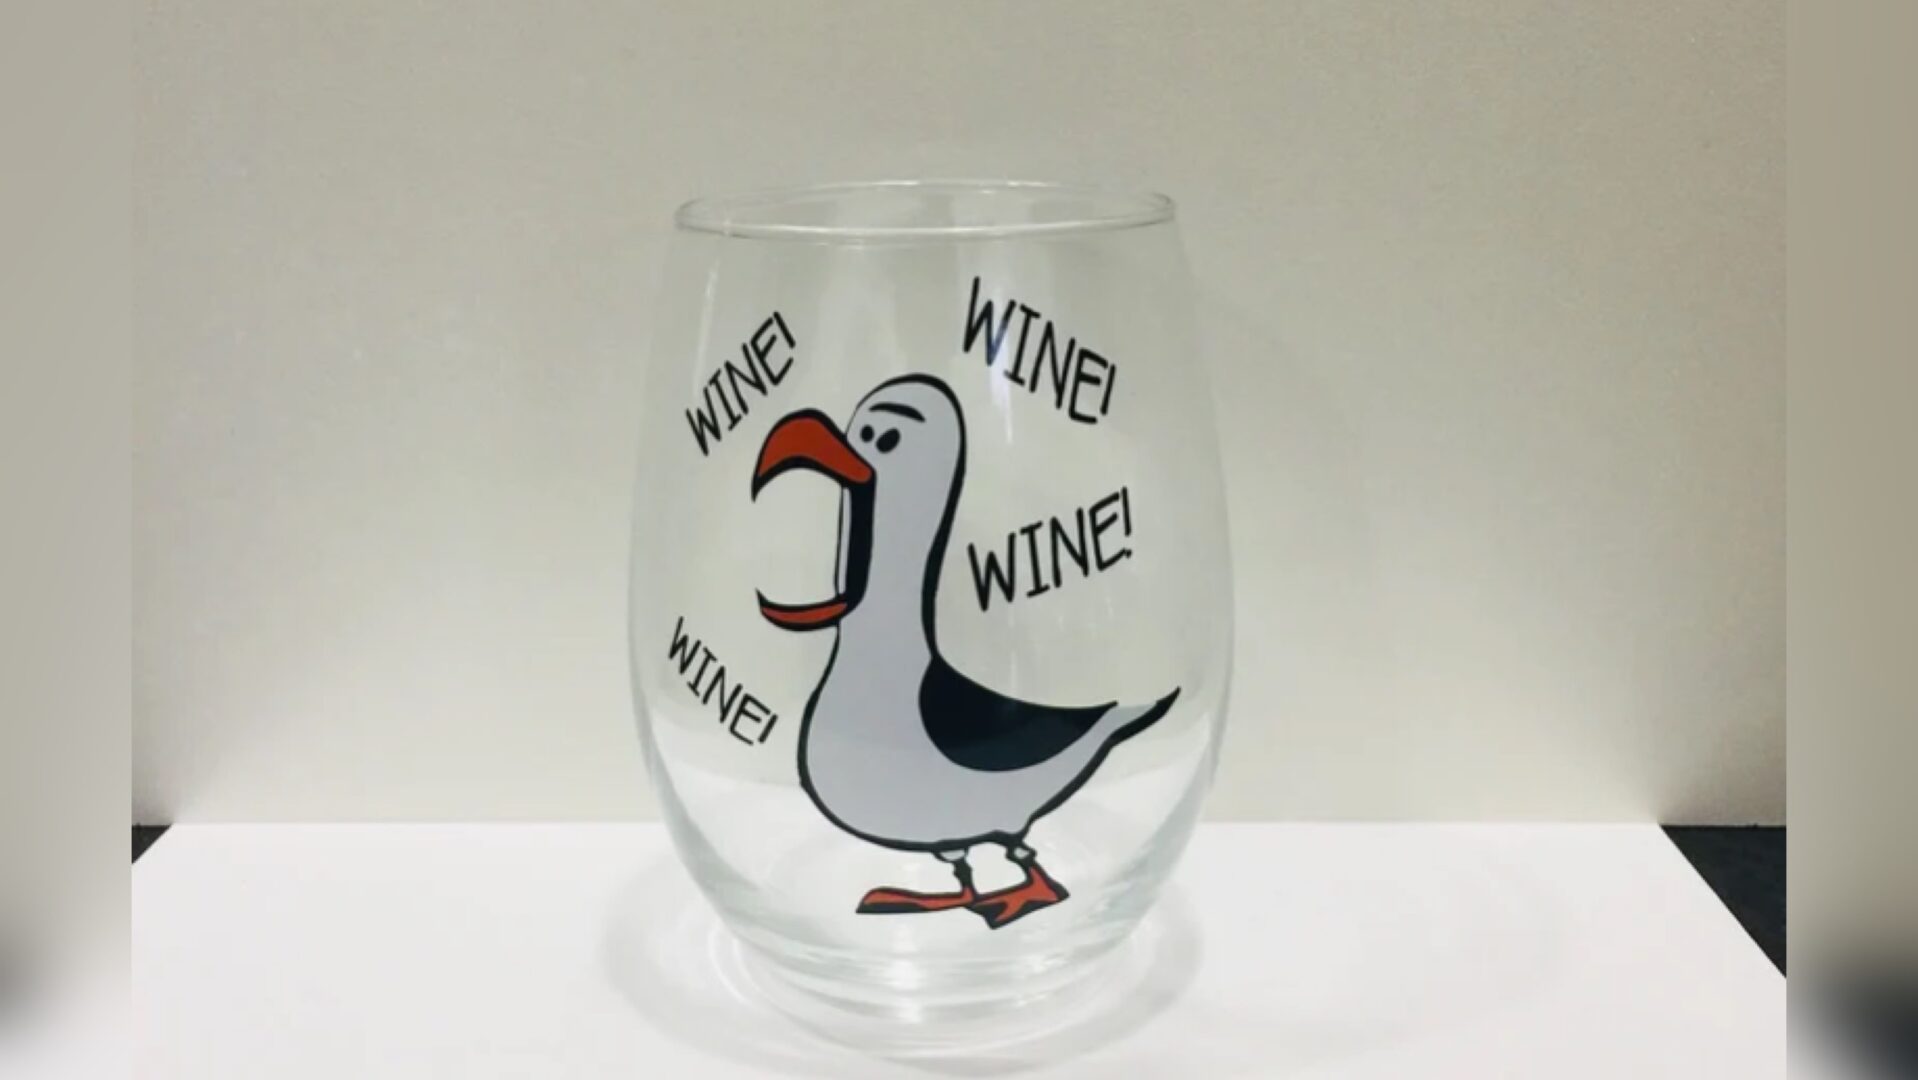 Say Cheers With This Finding Nemo Wine Glass!